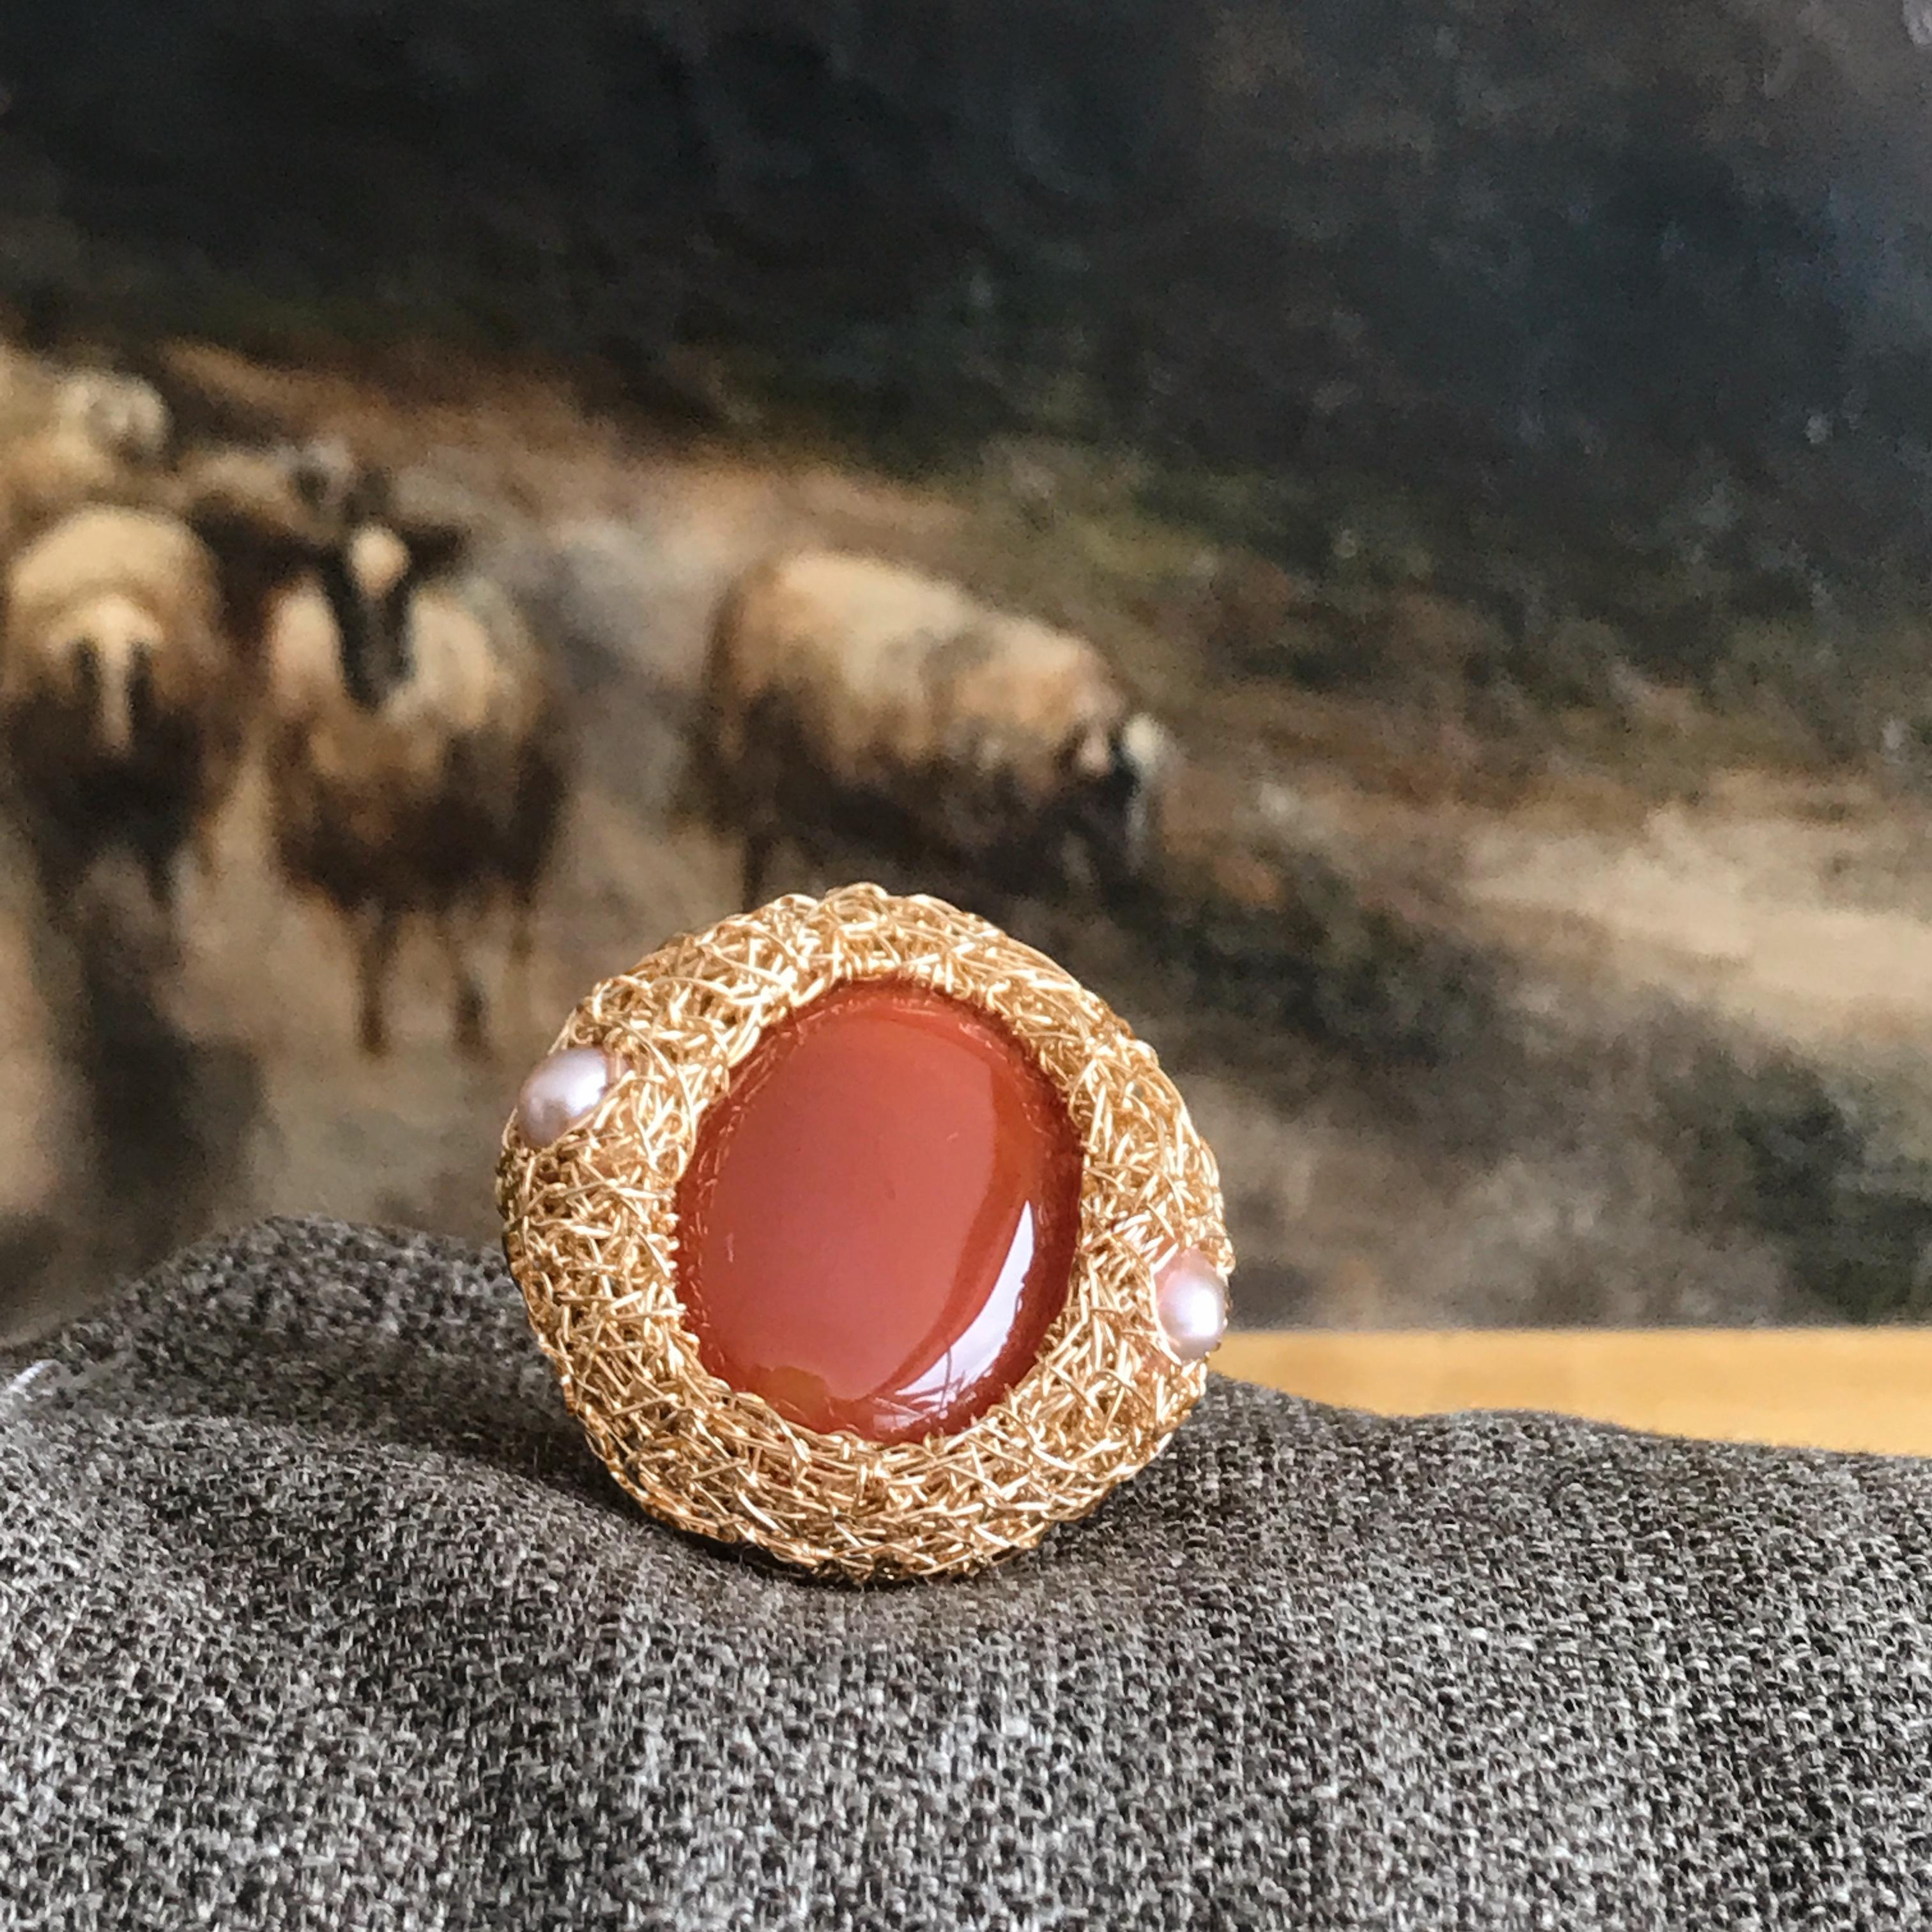 Oval Carnelian and Pearls 14 Kt Gold F. Cocktail Statement Ring by the Artist For Sale 3